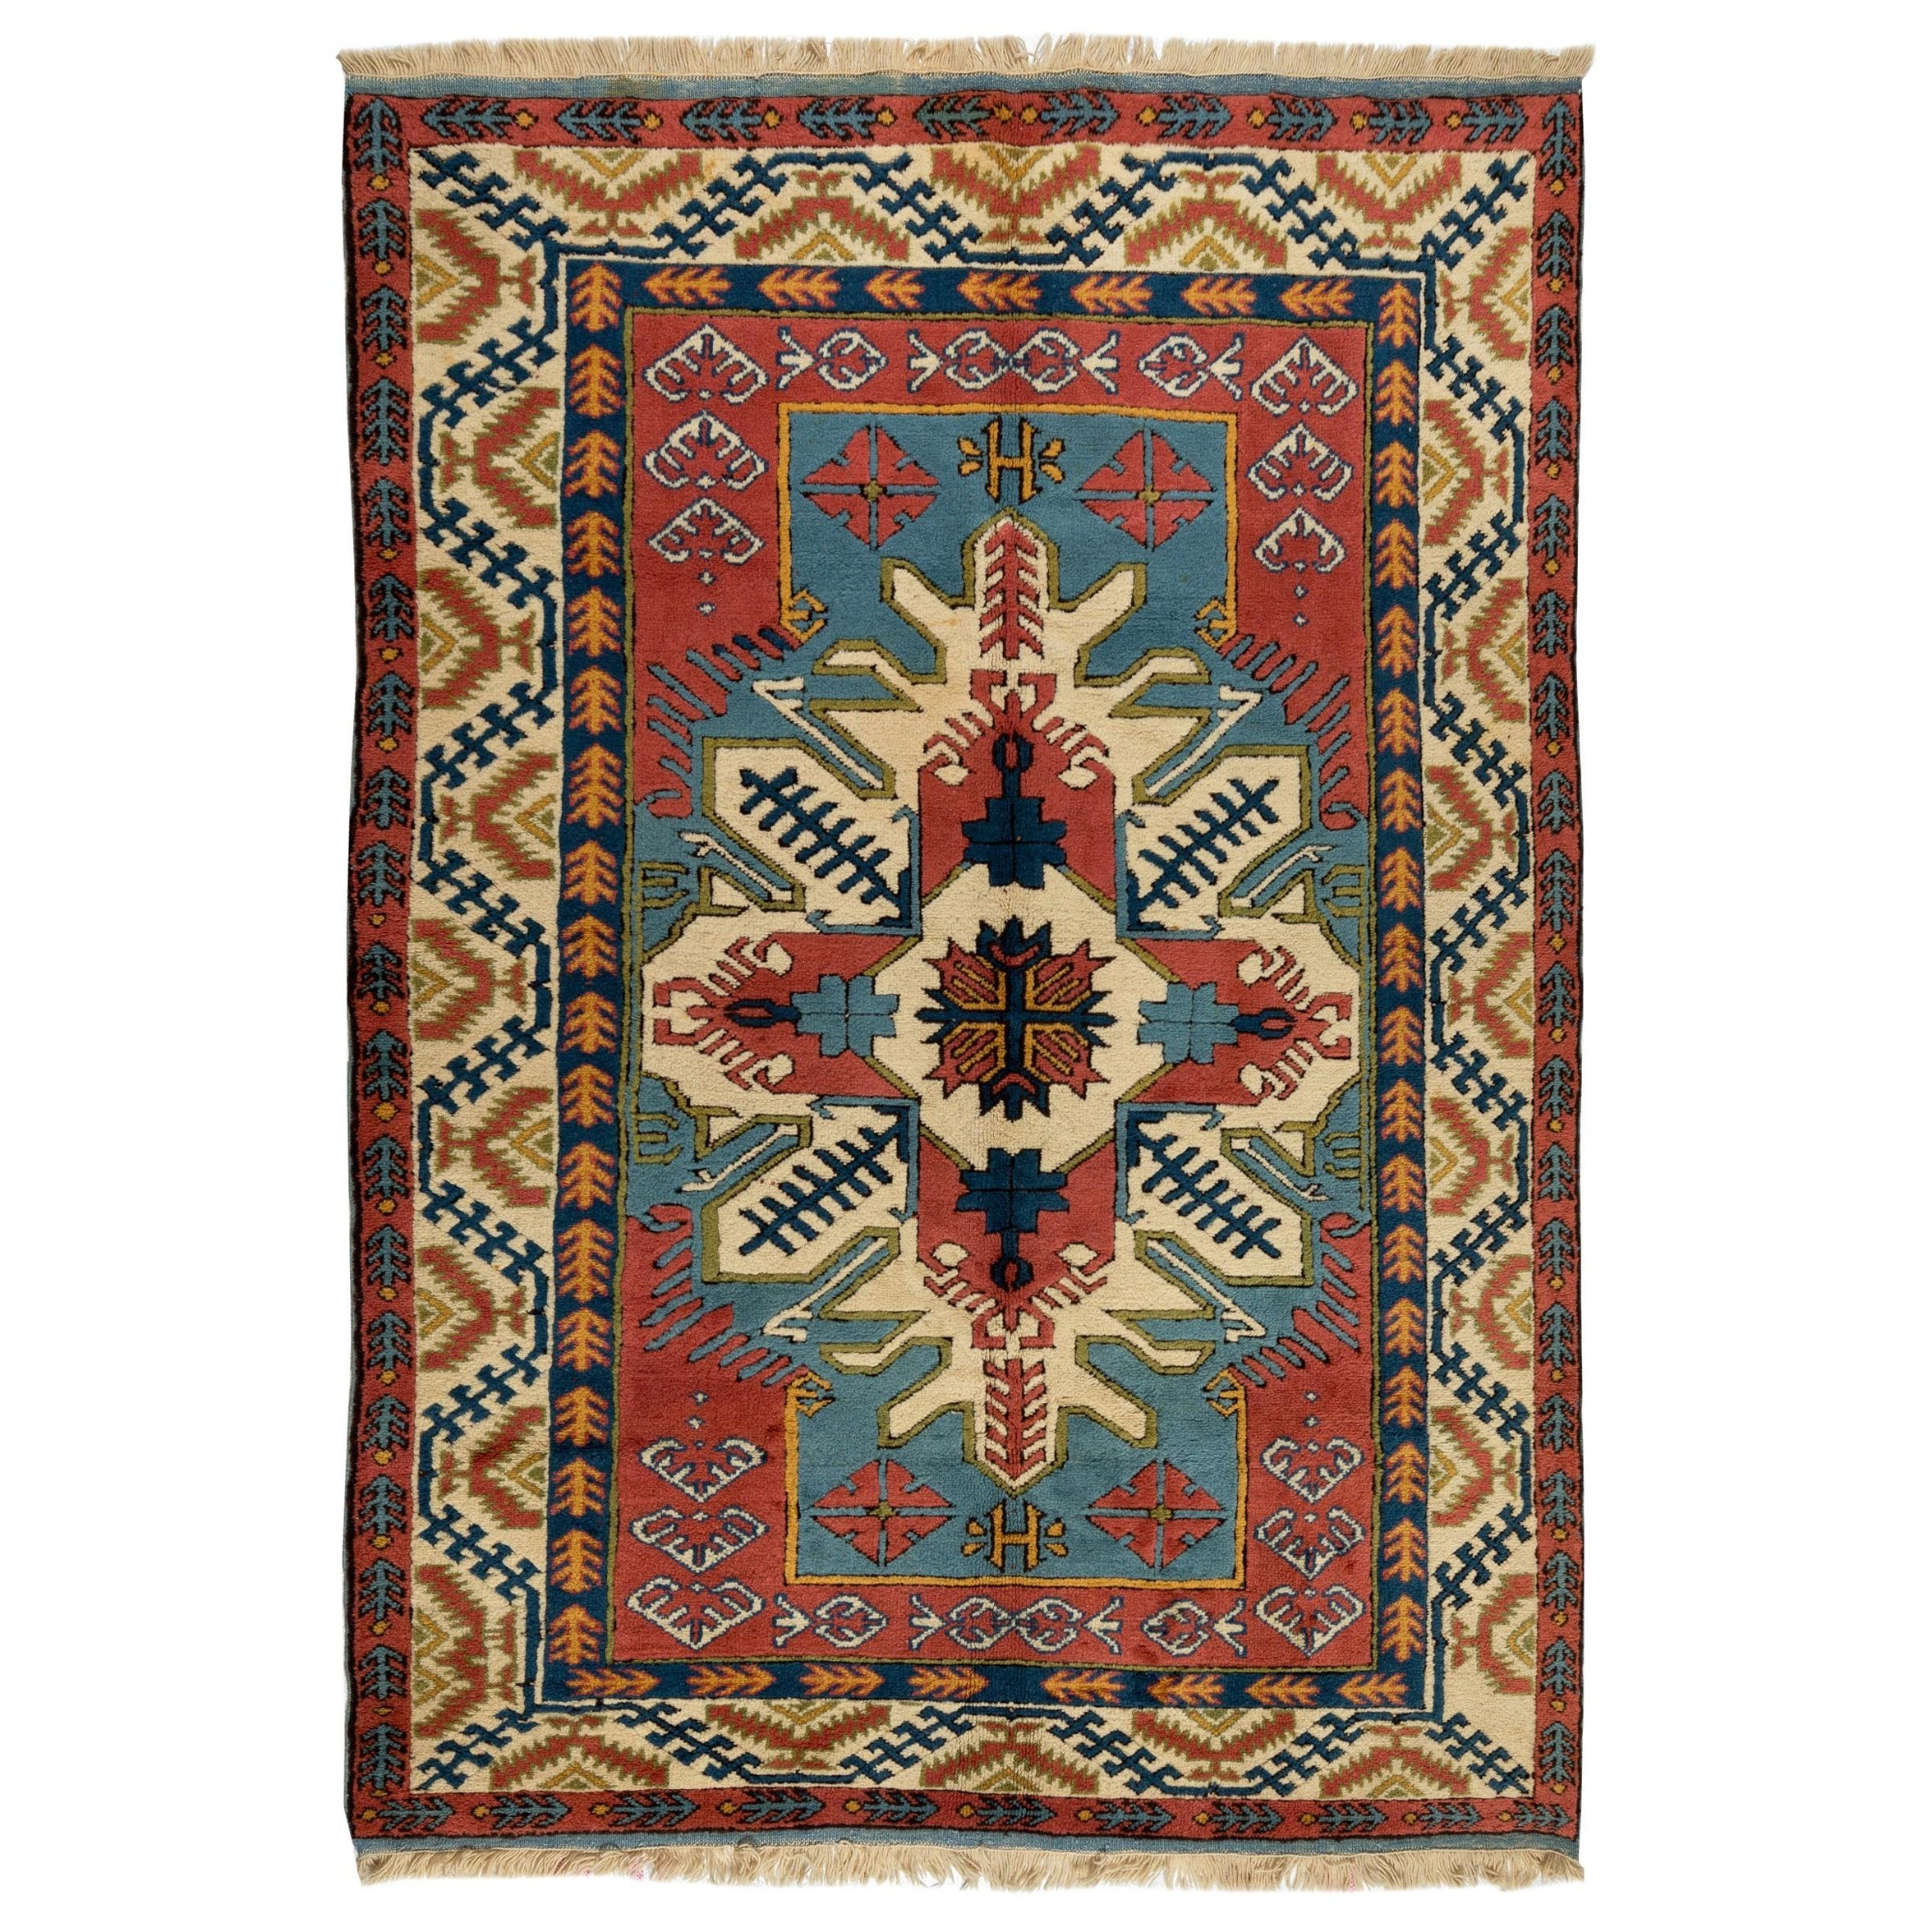 6x8.4 Ft New Hand-Knotted Turkish Wool Rug. Geometric Design, Soft Medium Pile For Sale